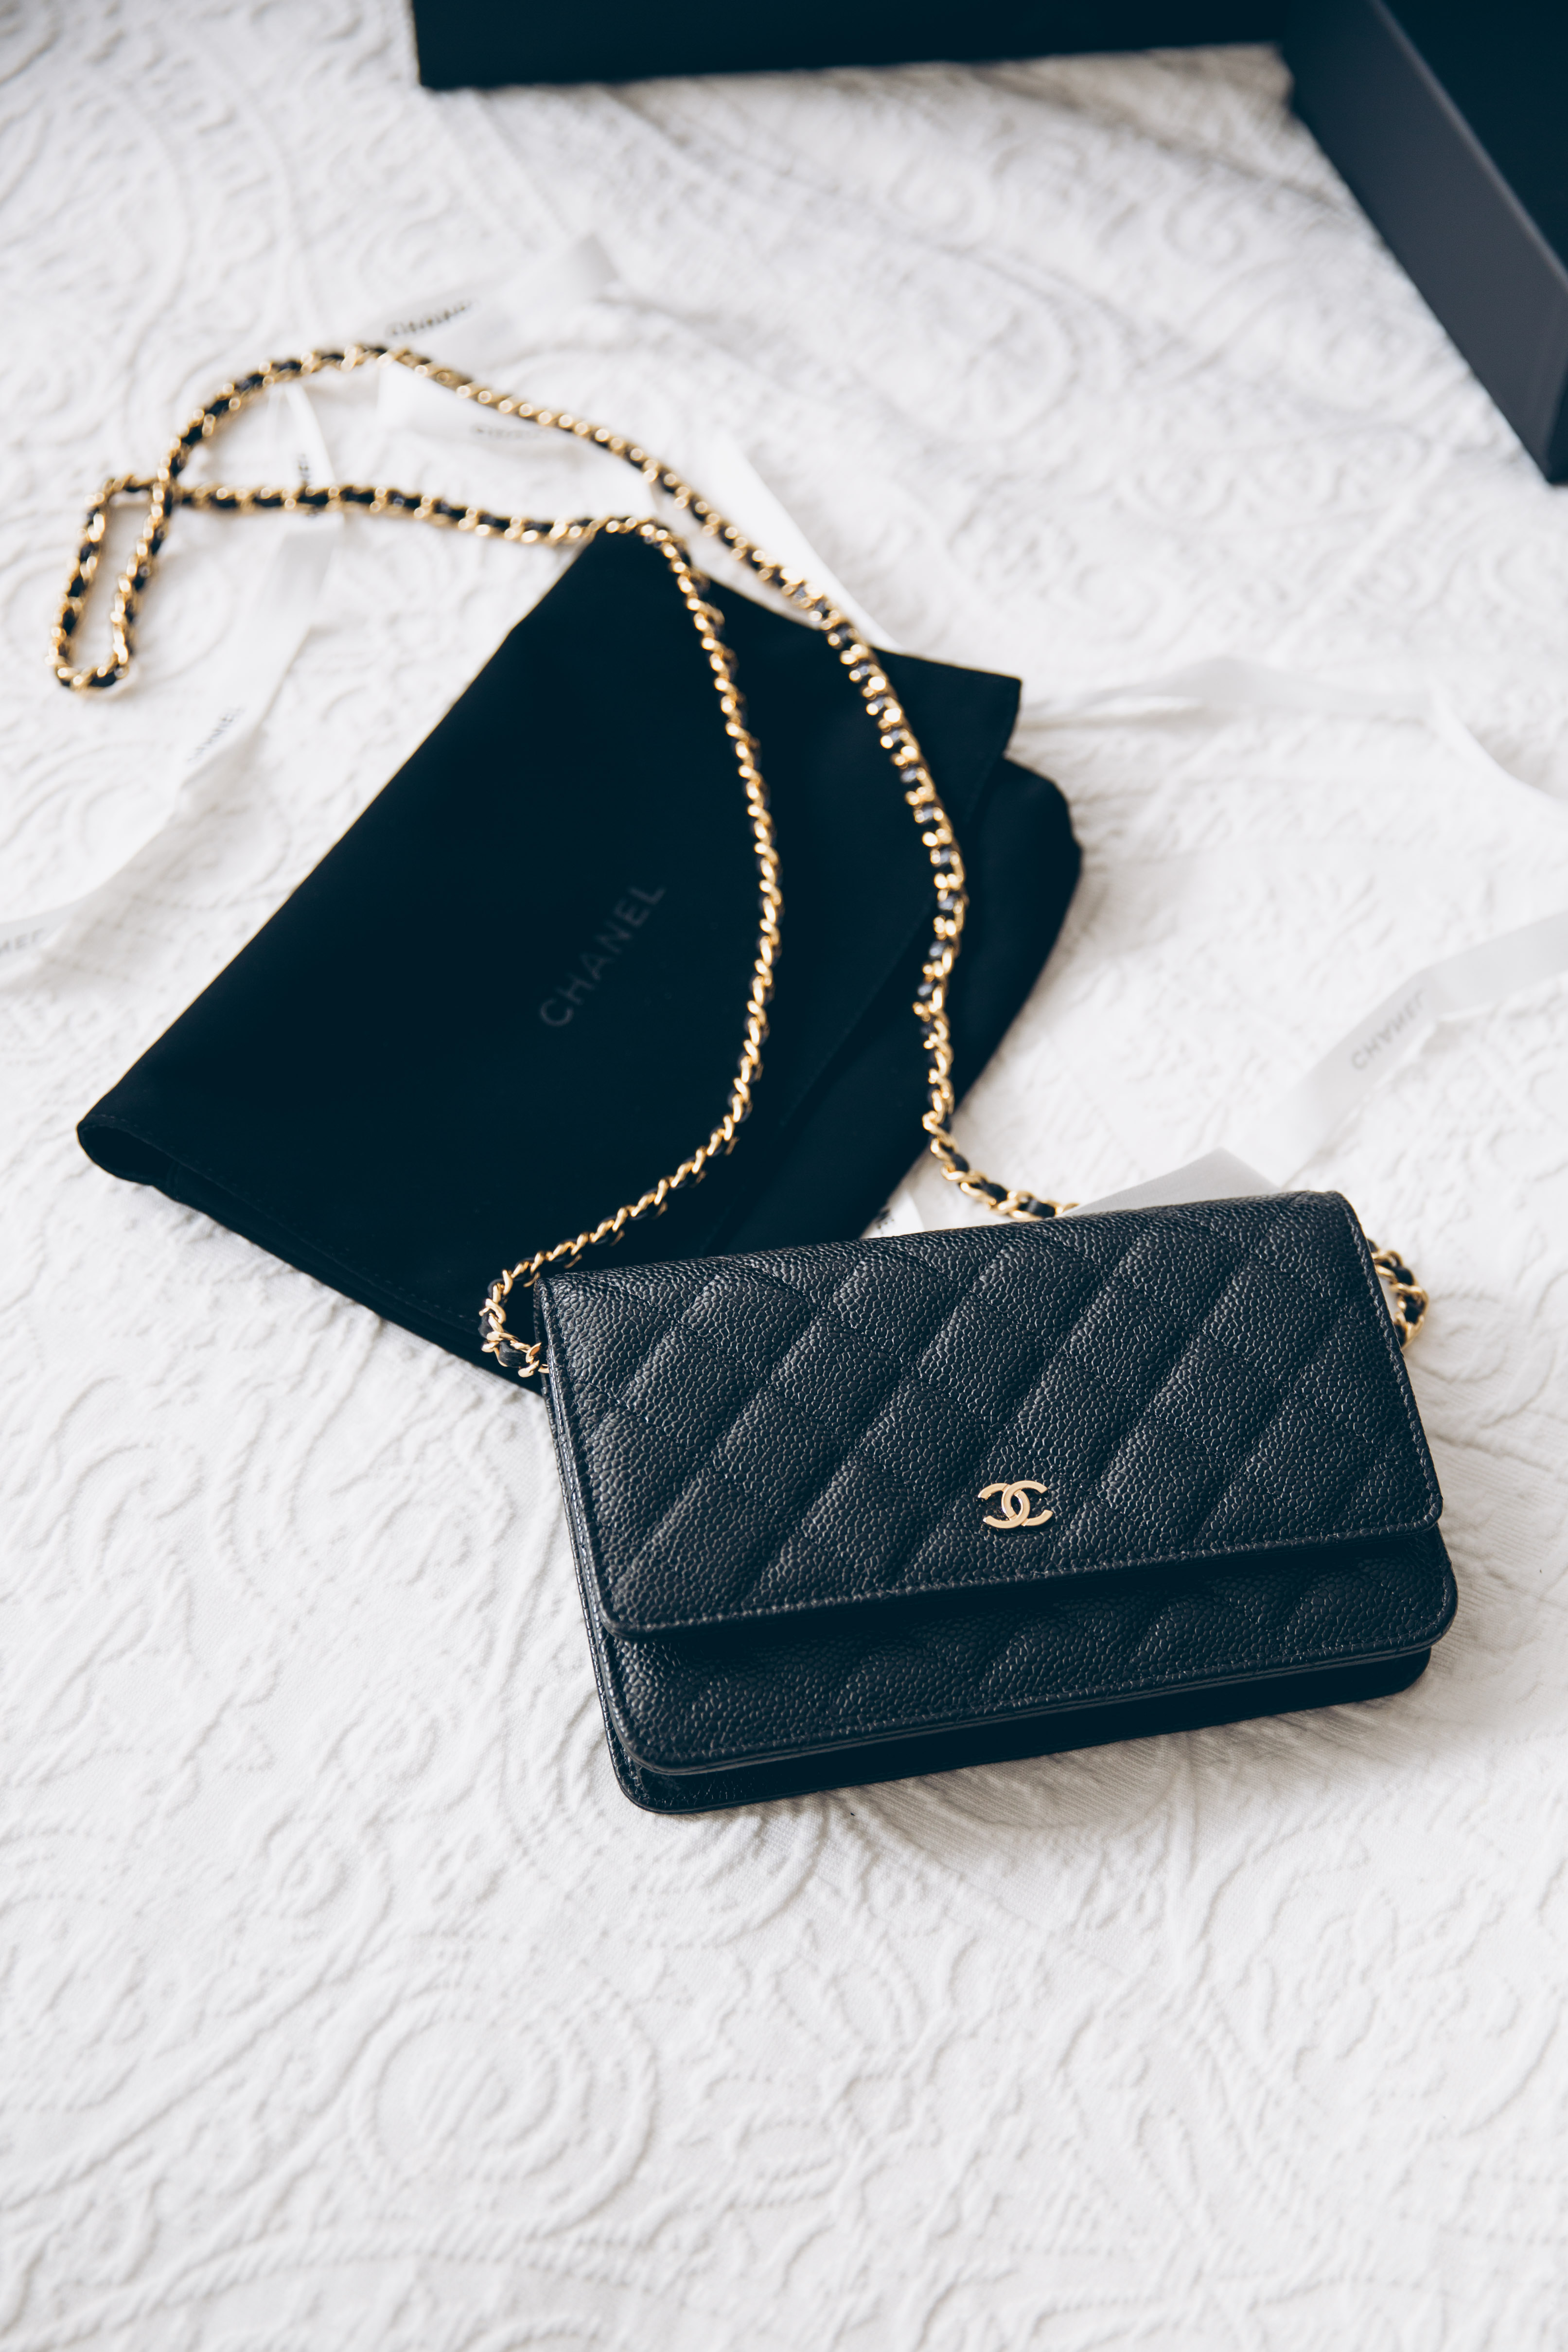 Five Reasons Why You Should Buy The Chanel WOC - Review - Fashion